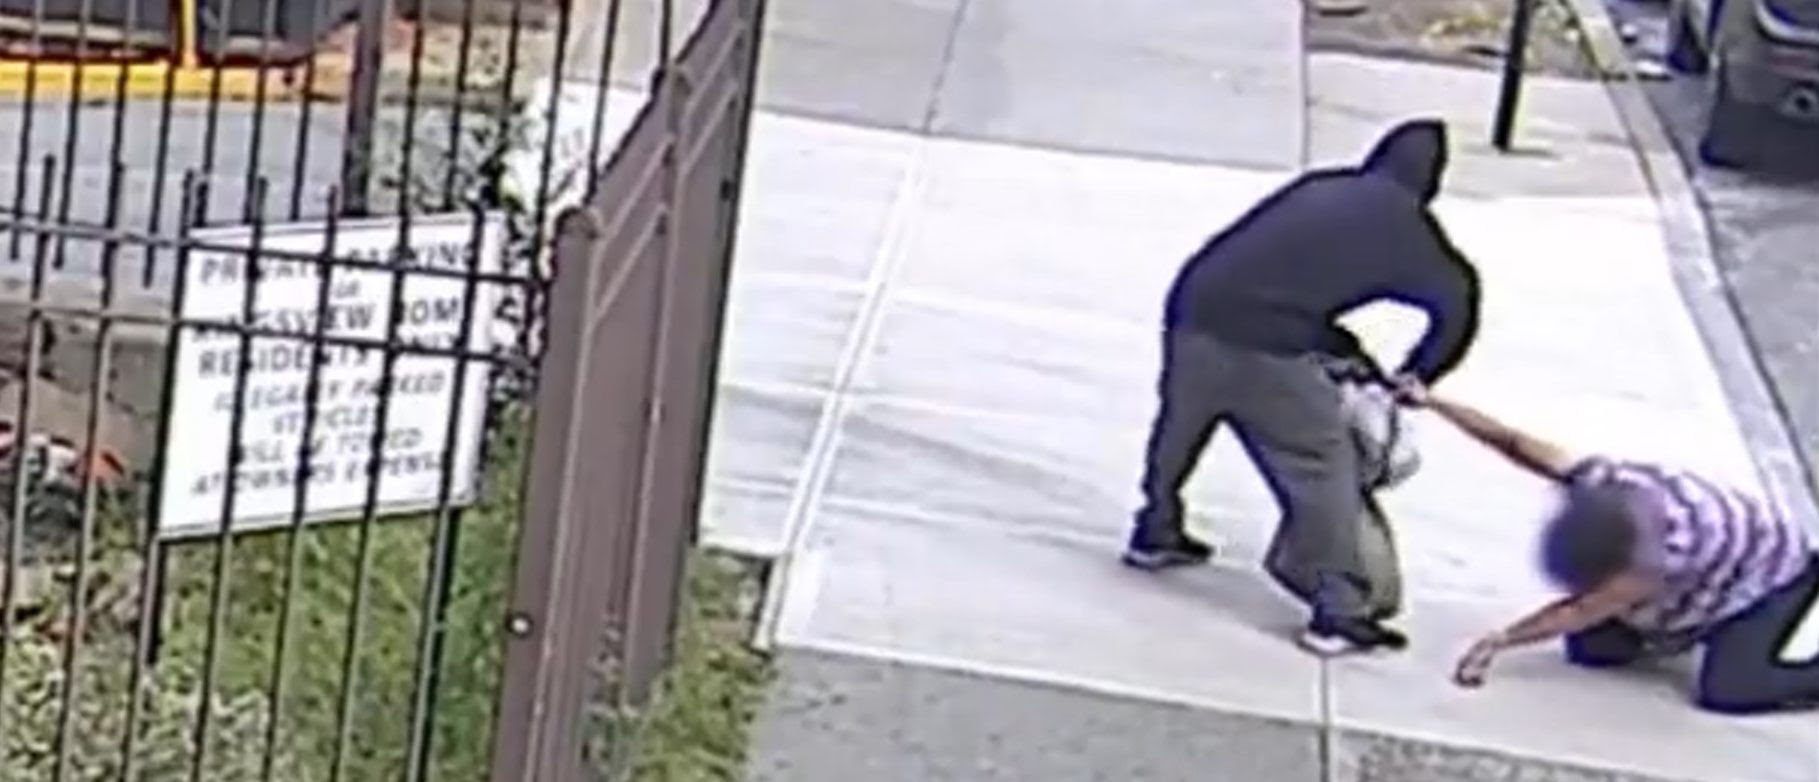 Video Shows 65-Year-Old Woman Being Dragged, Punched In Attempted Robbery